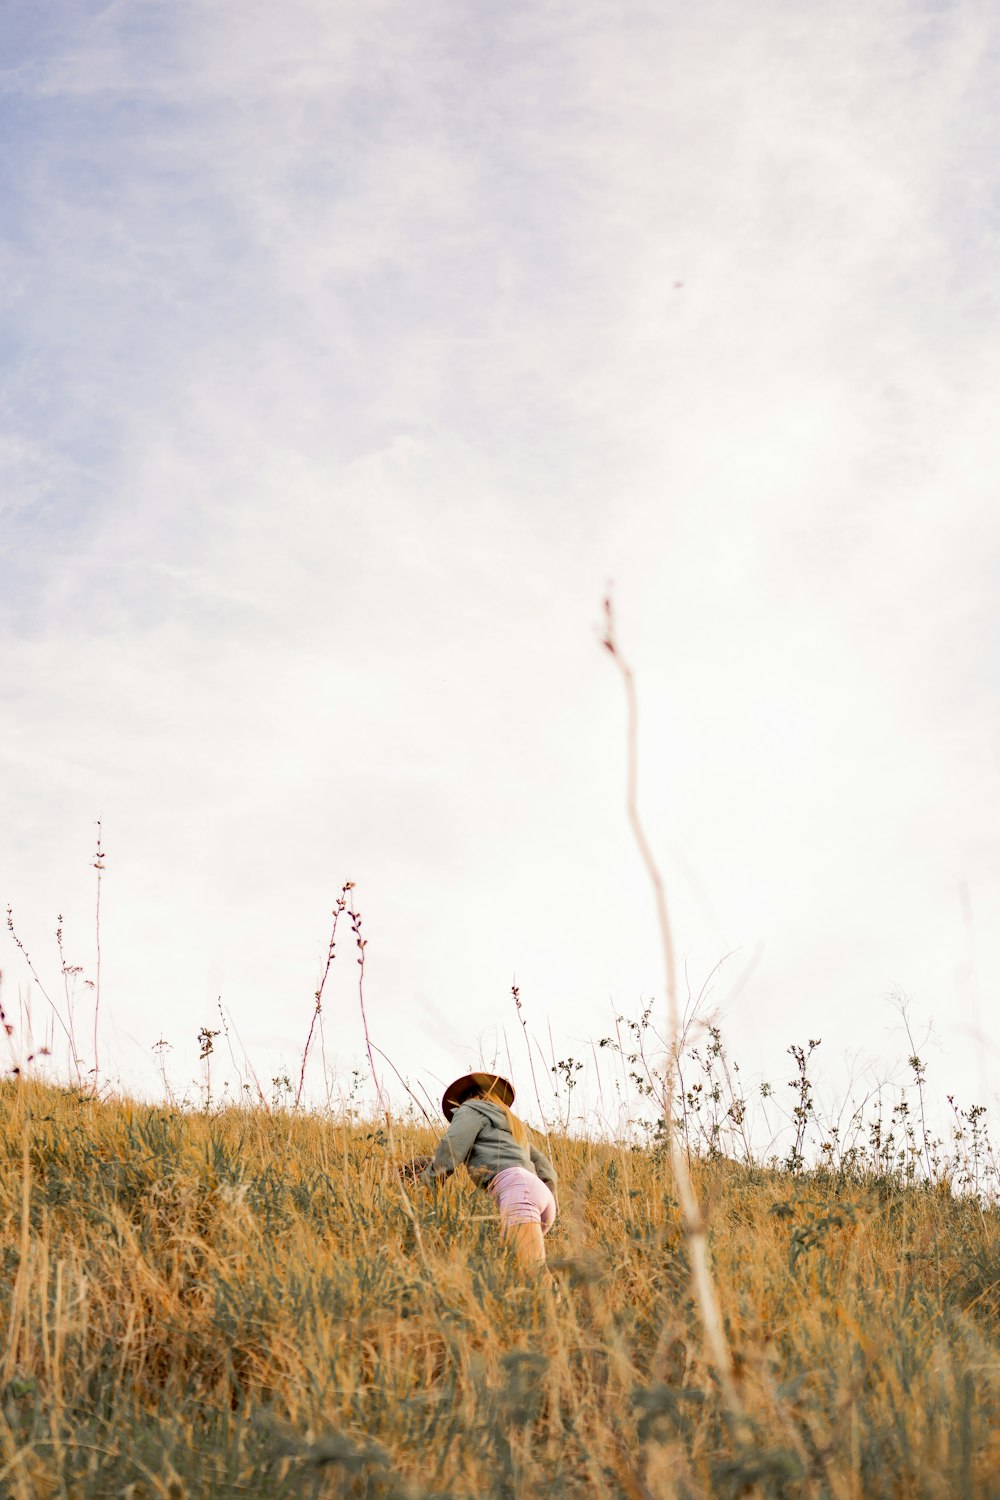 a person kneeling down in a field of tall grass